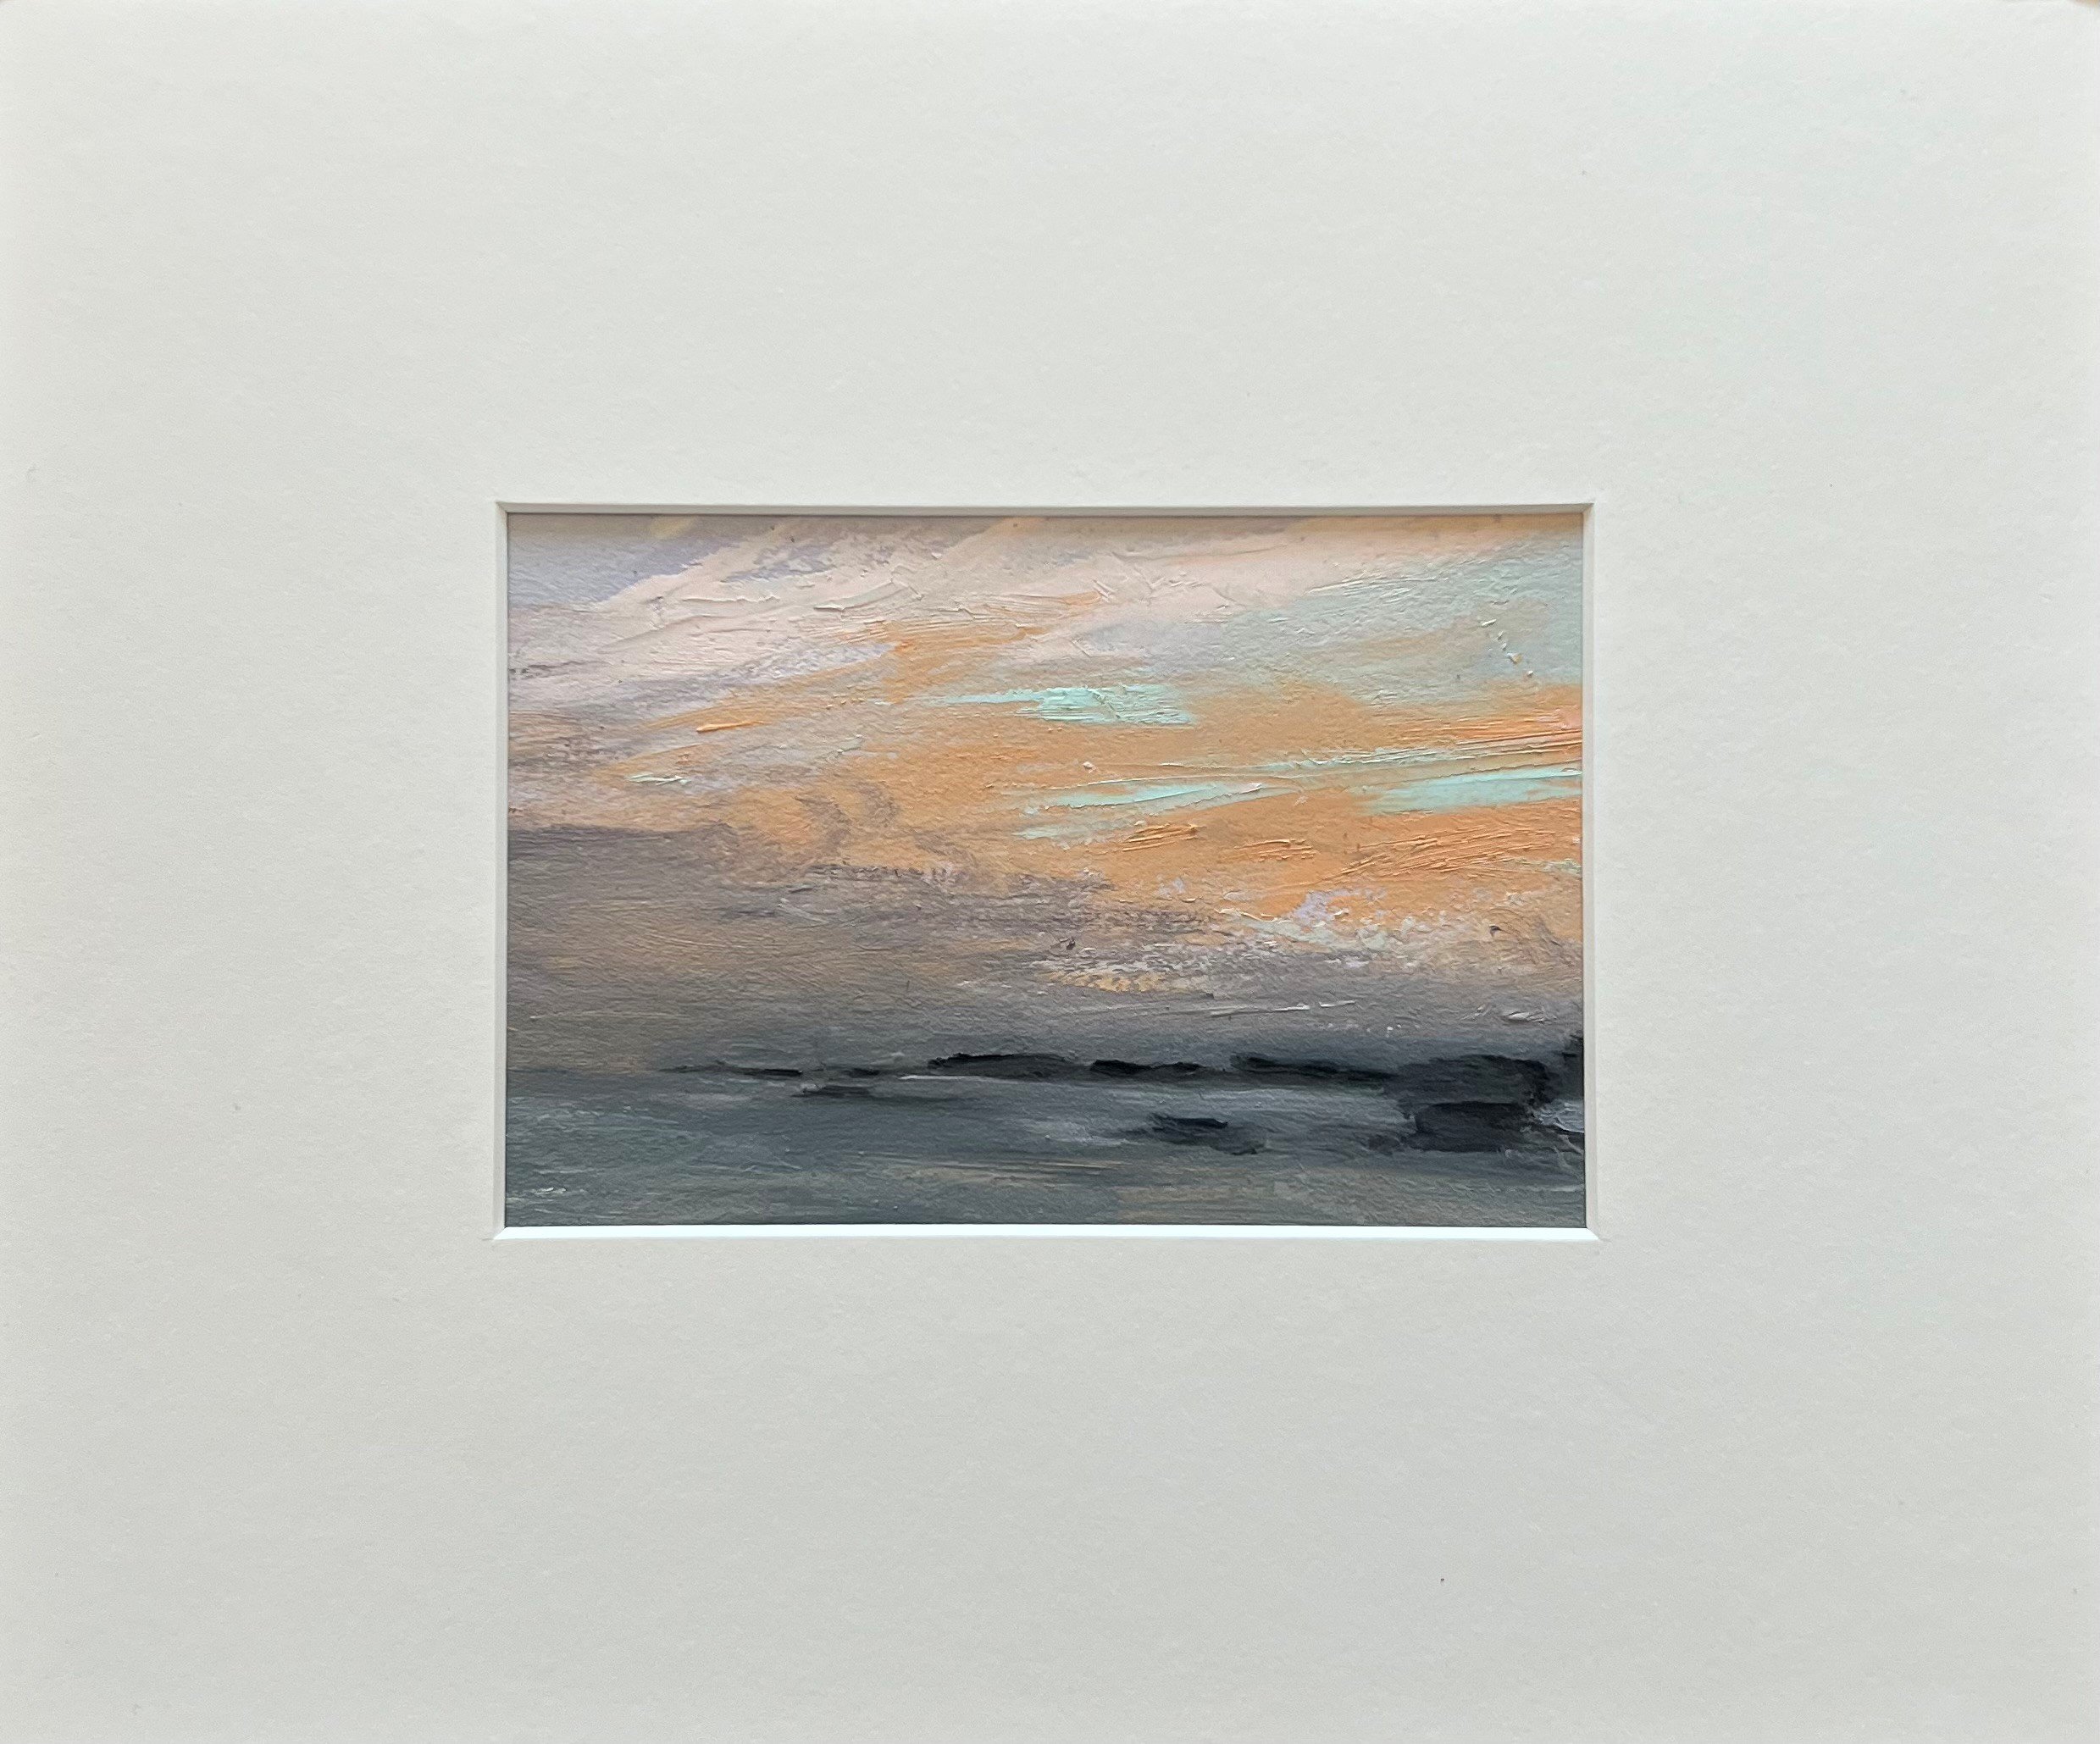 2022-06  Flying Point Sunset   Oil on Gesso Paper  12x14 inch mat   Window cut to 5x7 inches  Stony Creek, CT  .jpg